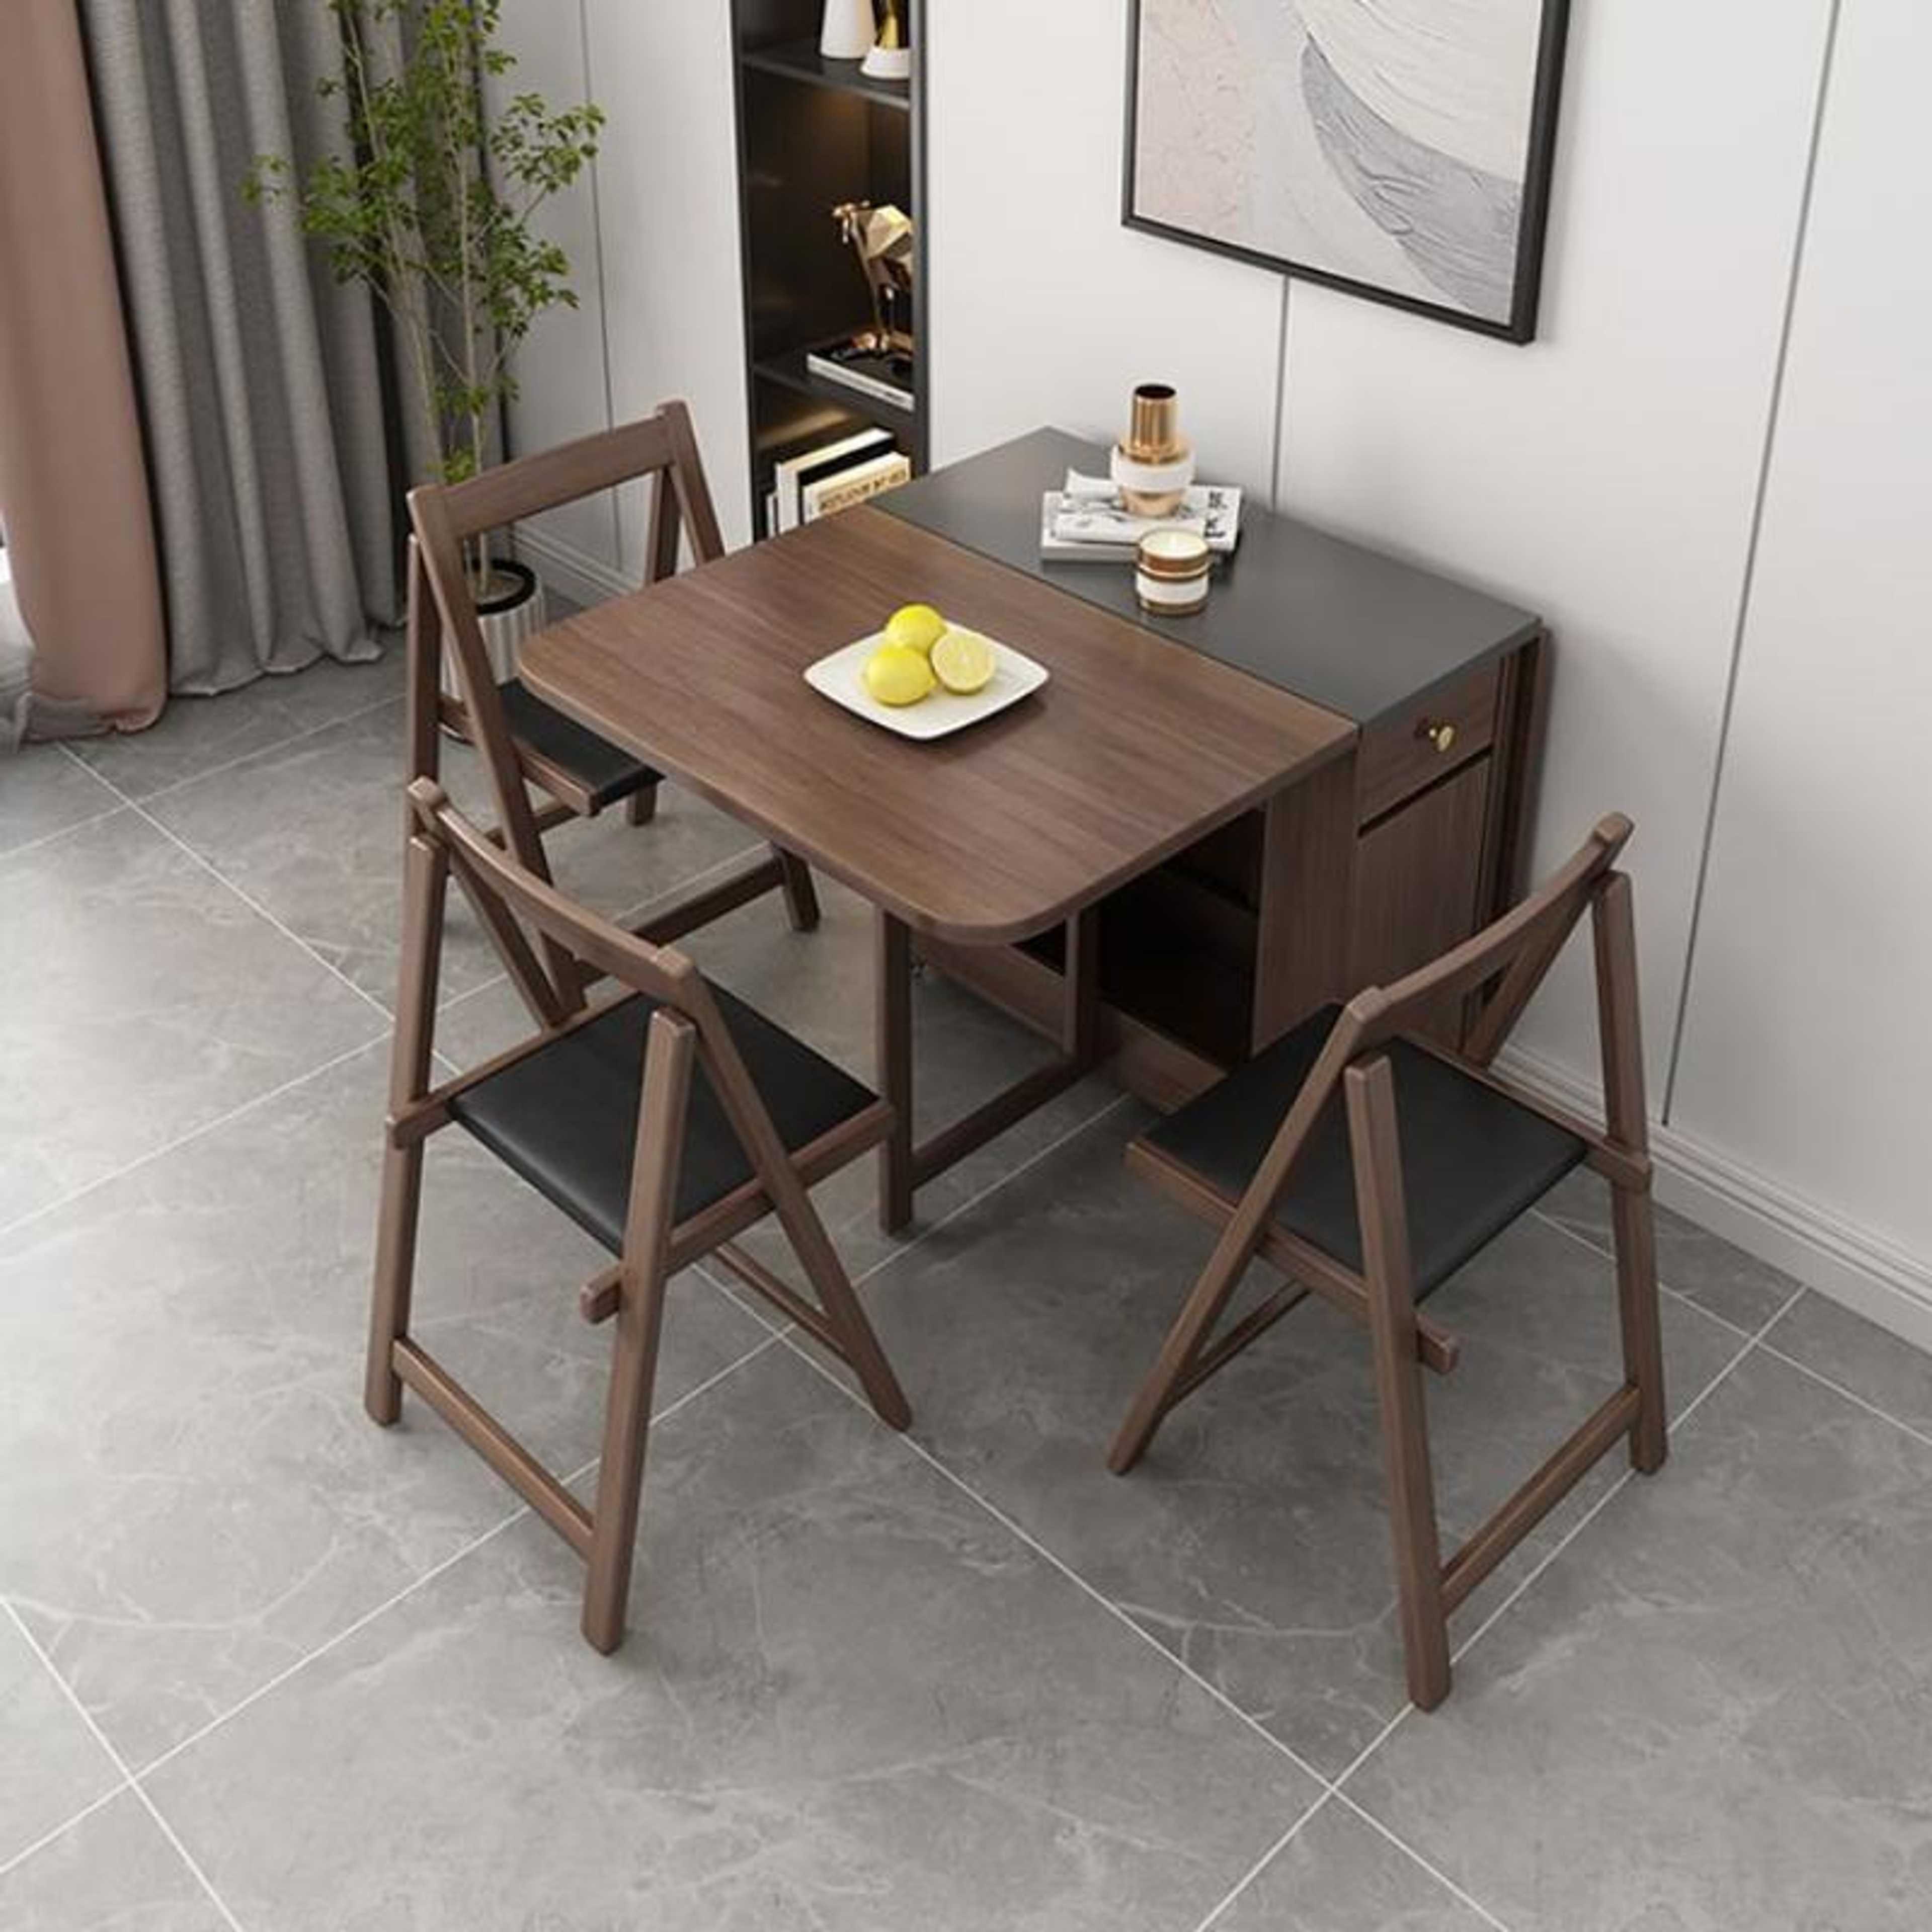 Folding dining table with chairs